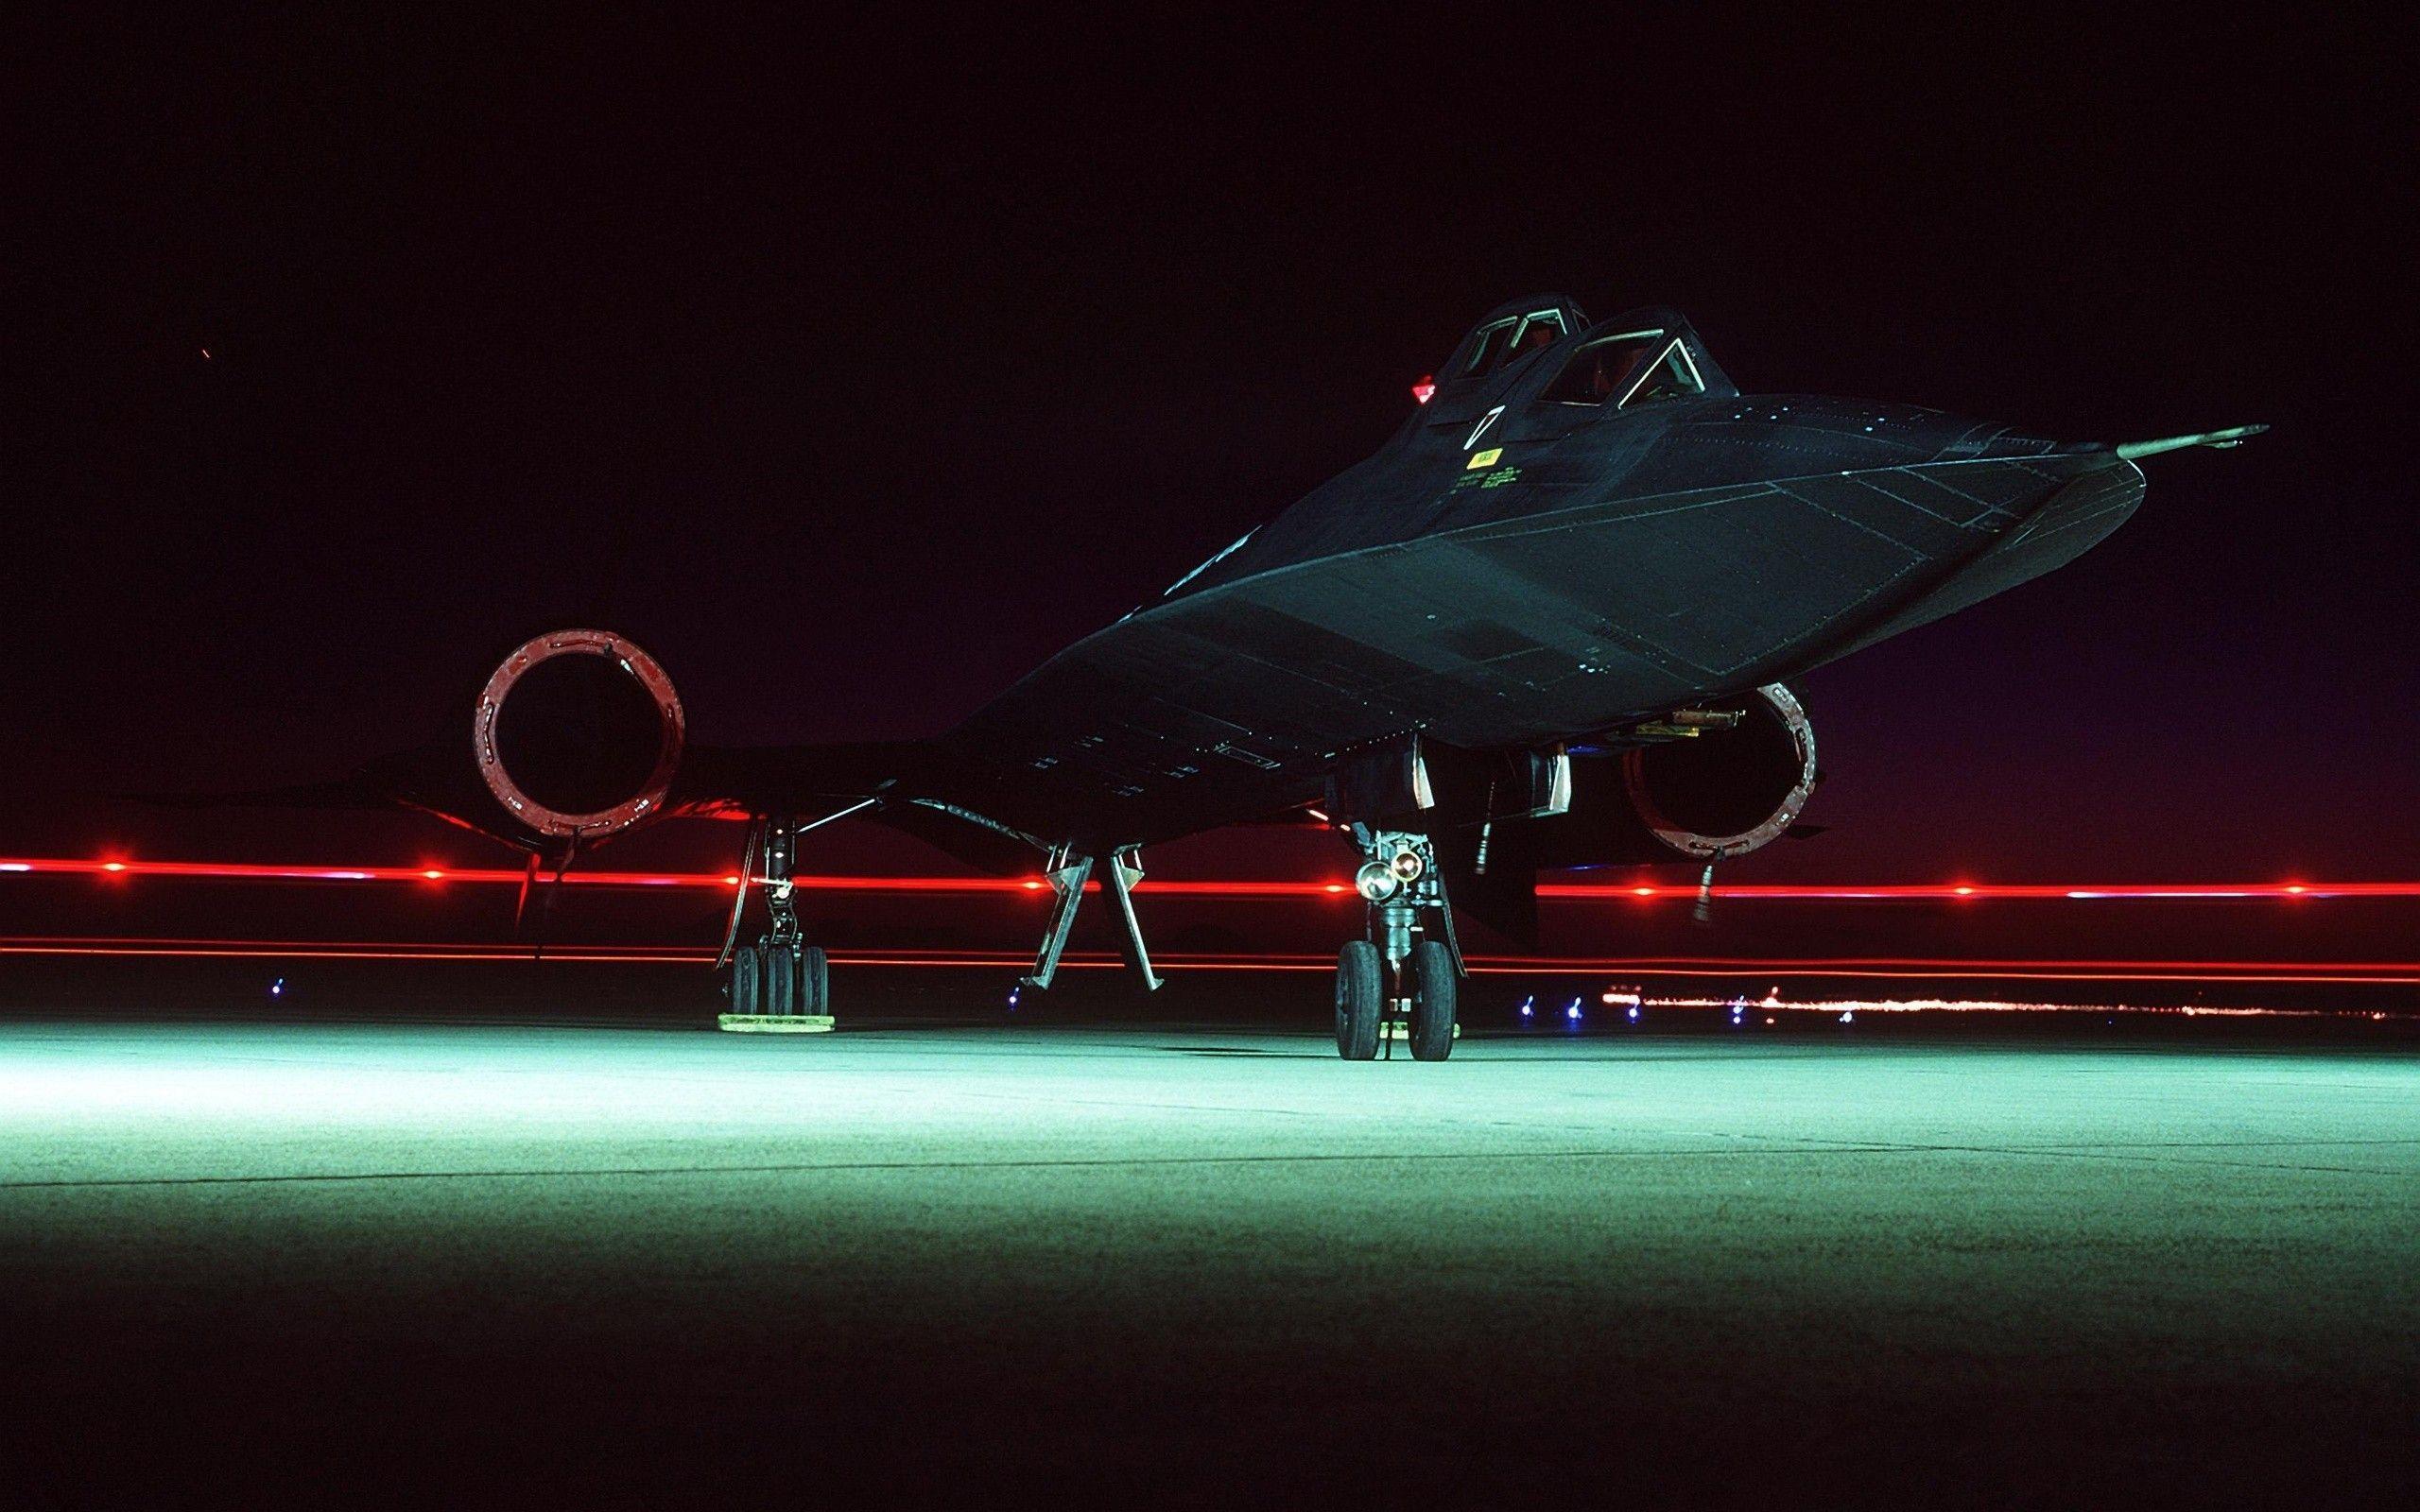 photography, Night, Long Exposure, Aircraft, Airplane, Military